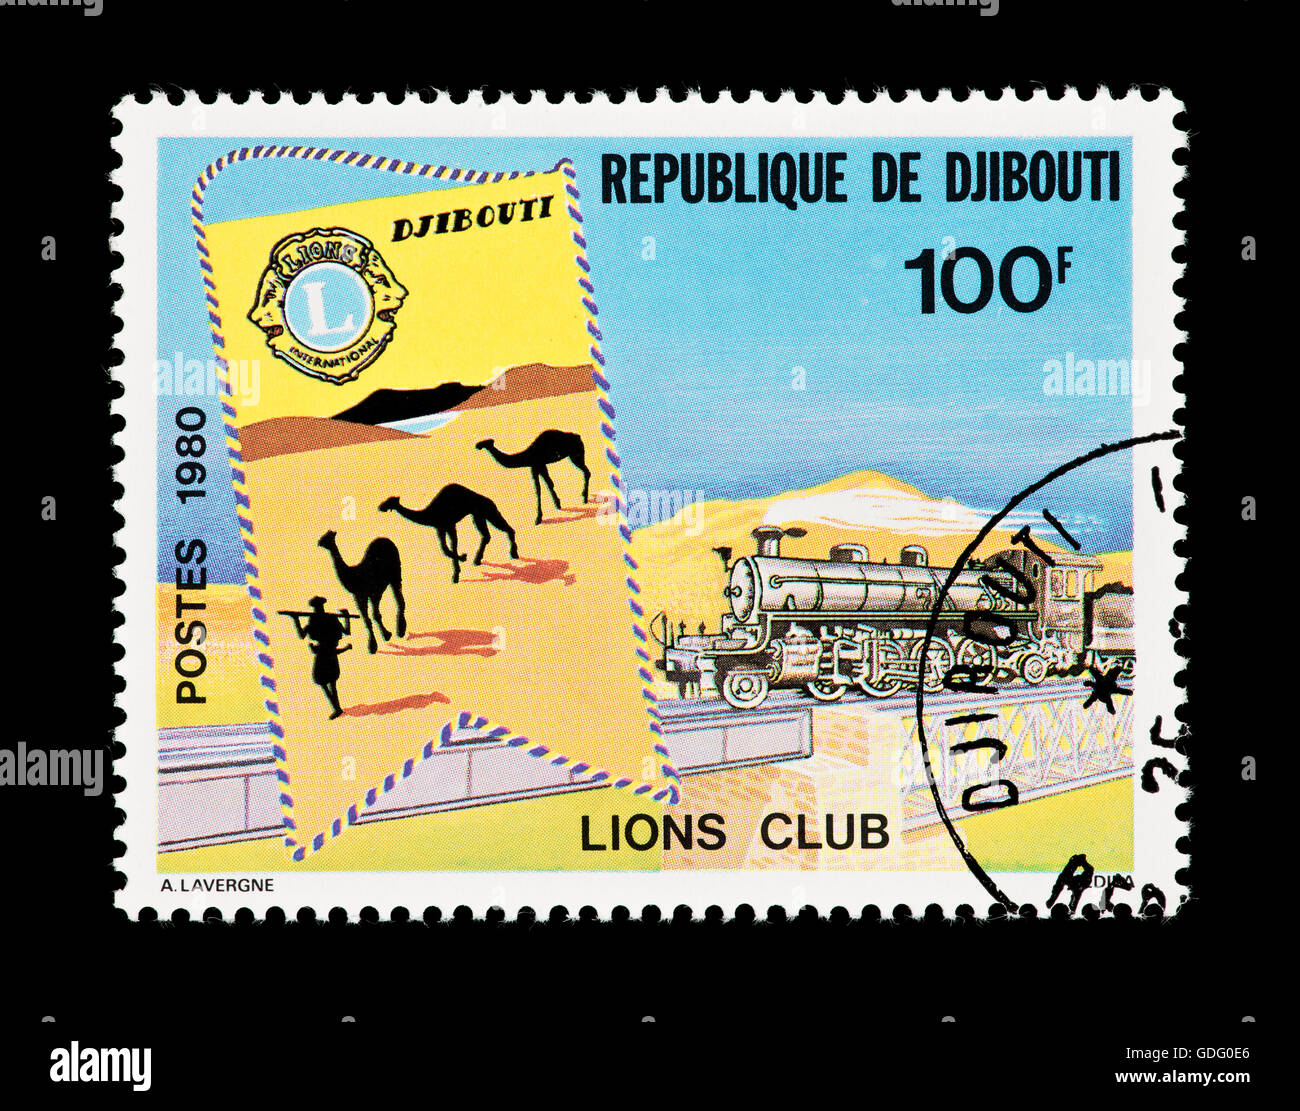 Postage stamp from Djibouti depicting camels and a steam engine, issued for the Lions CLub of Djibouti. Stock Photo